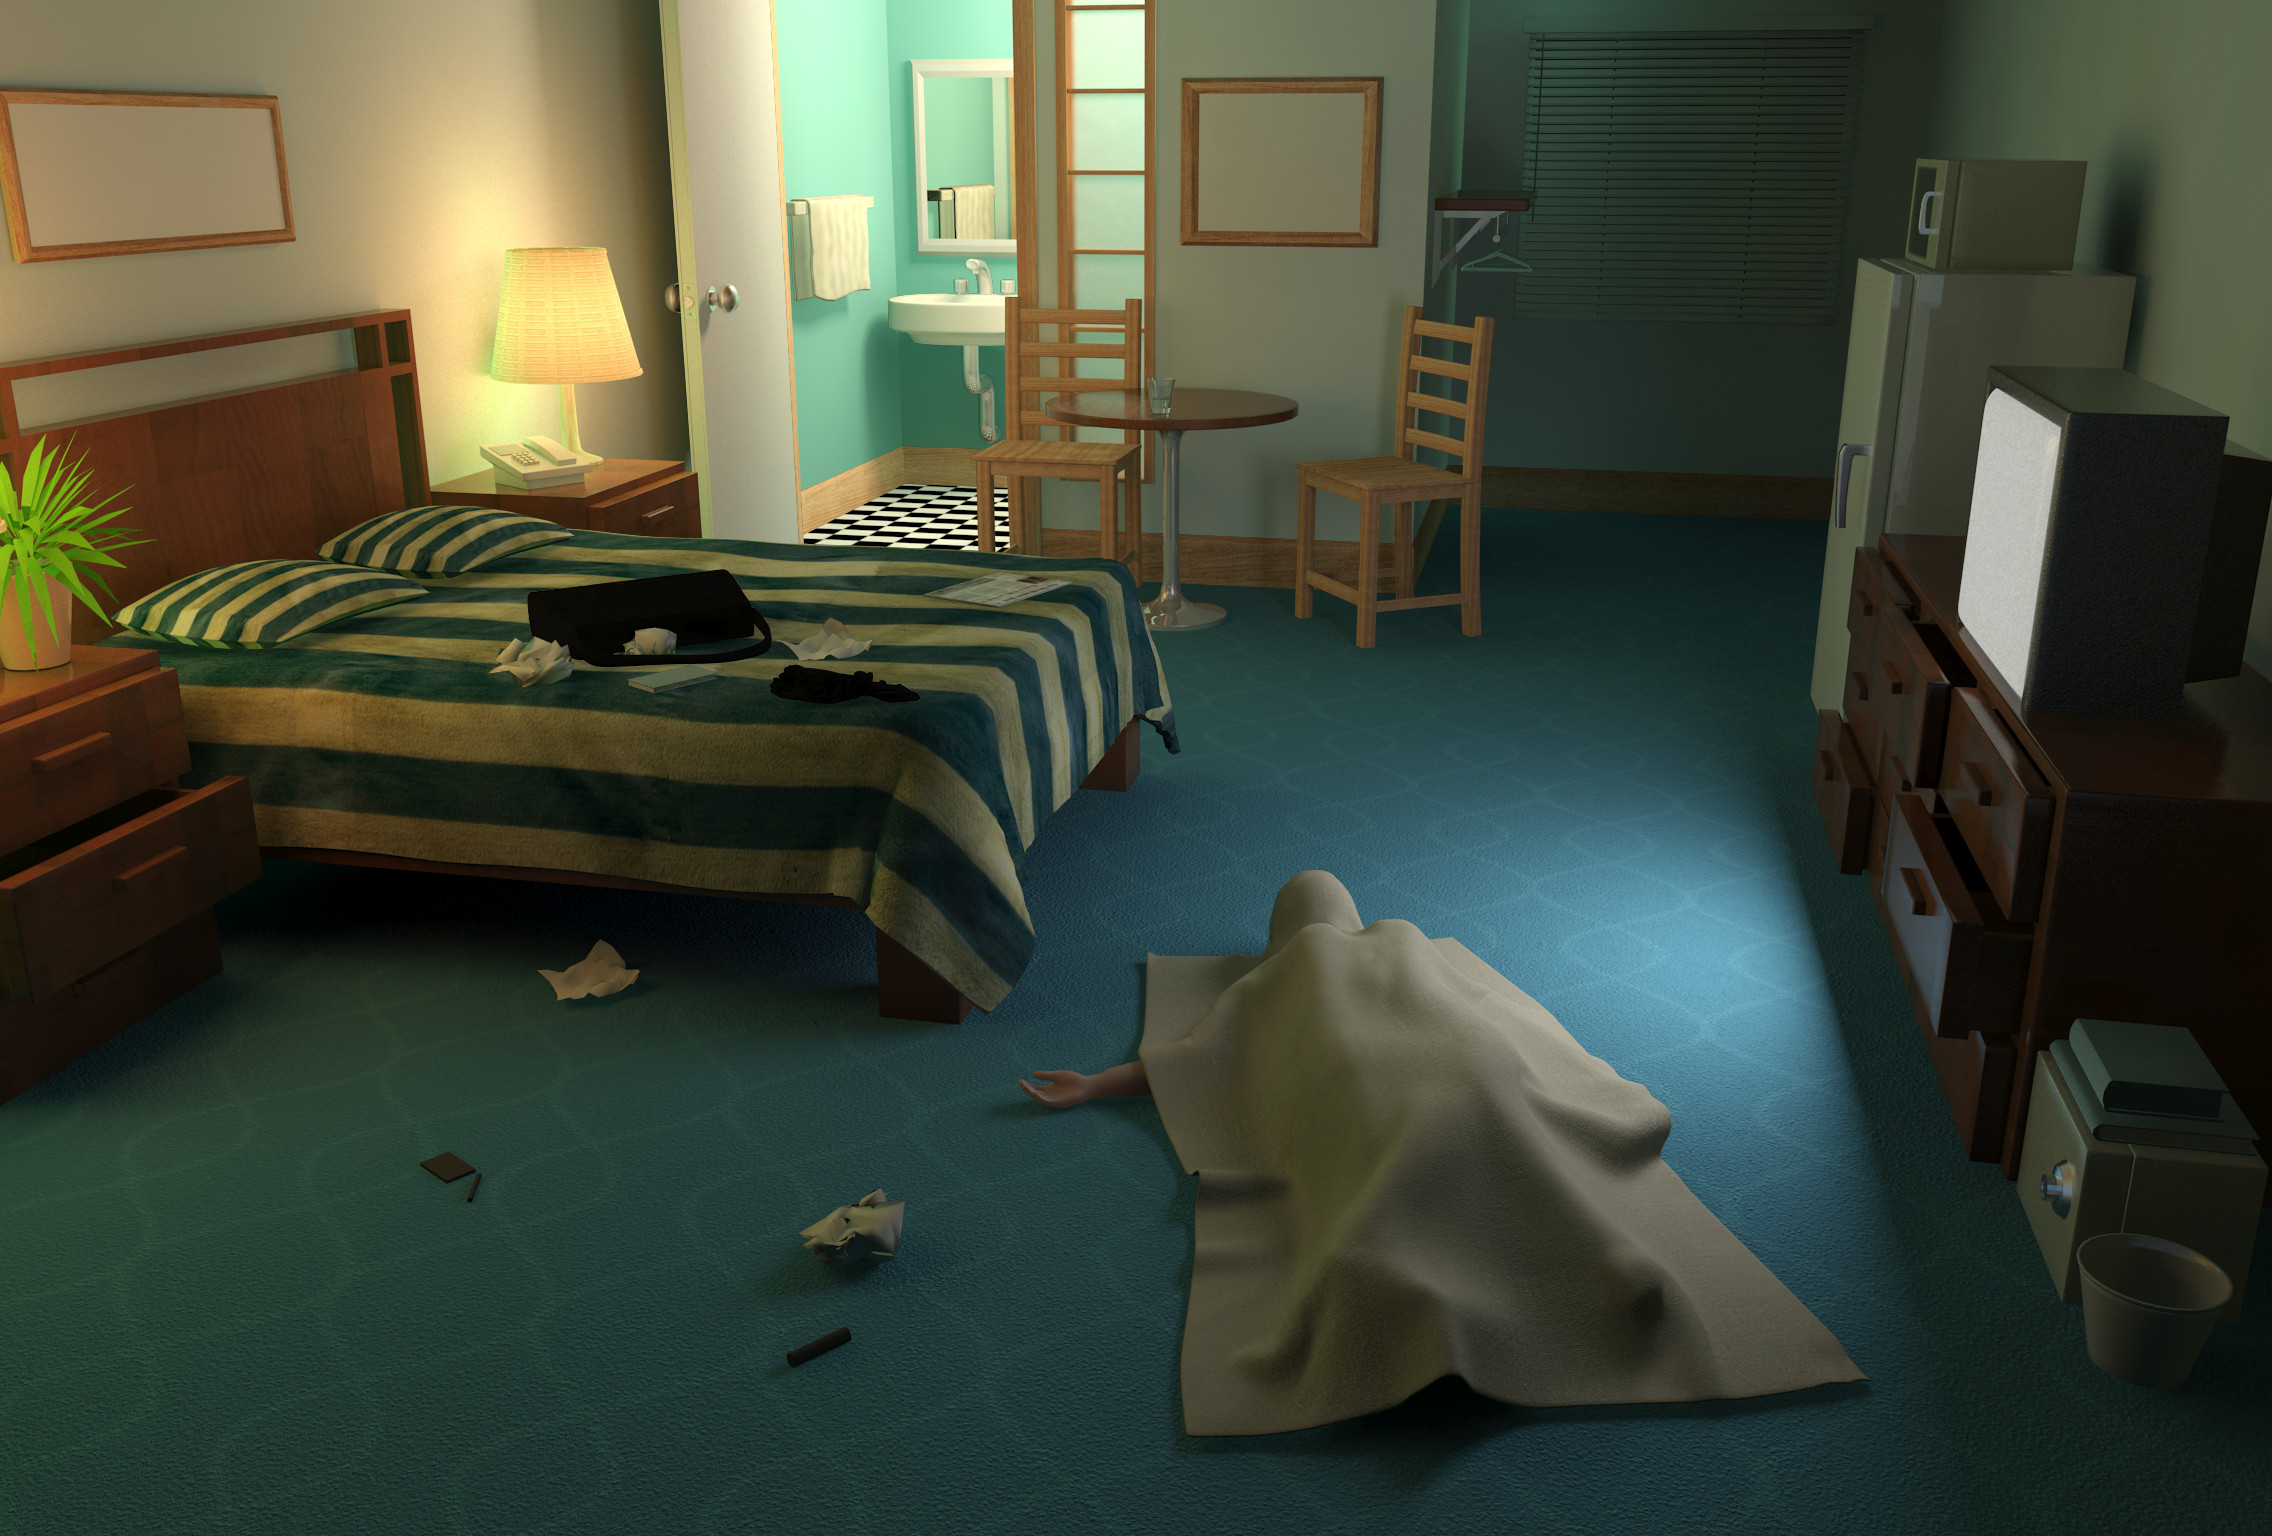 Motel Room scene (not final scene in game. Final was modified by another artist)